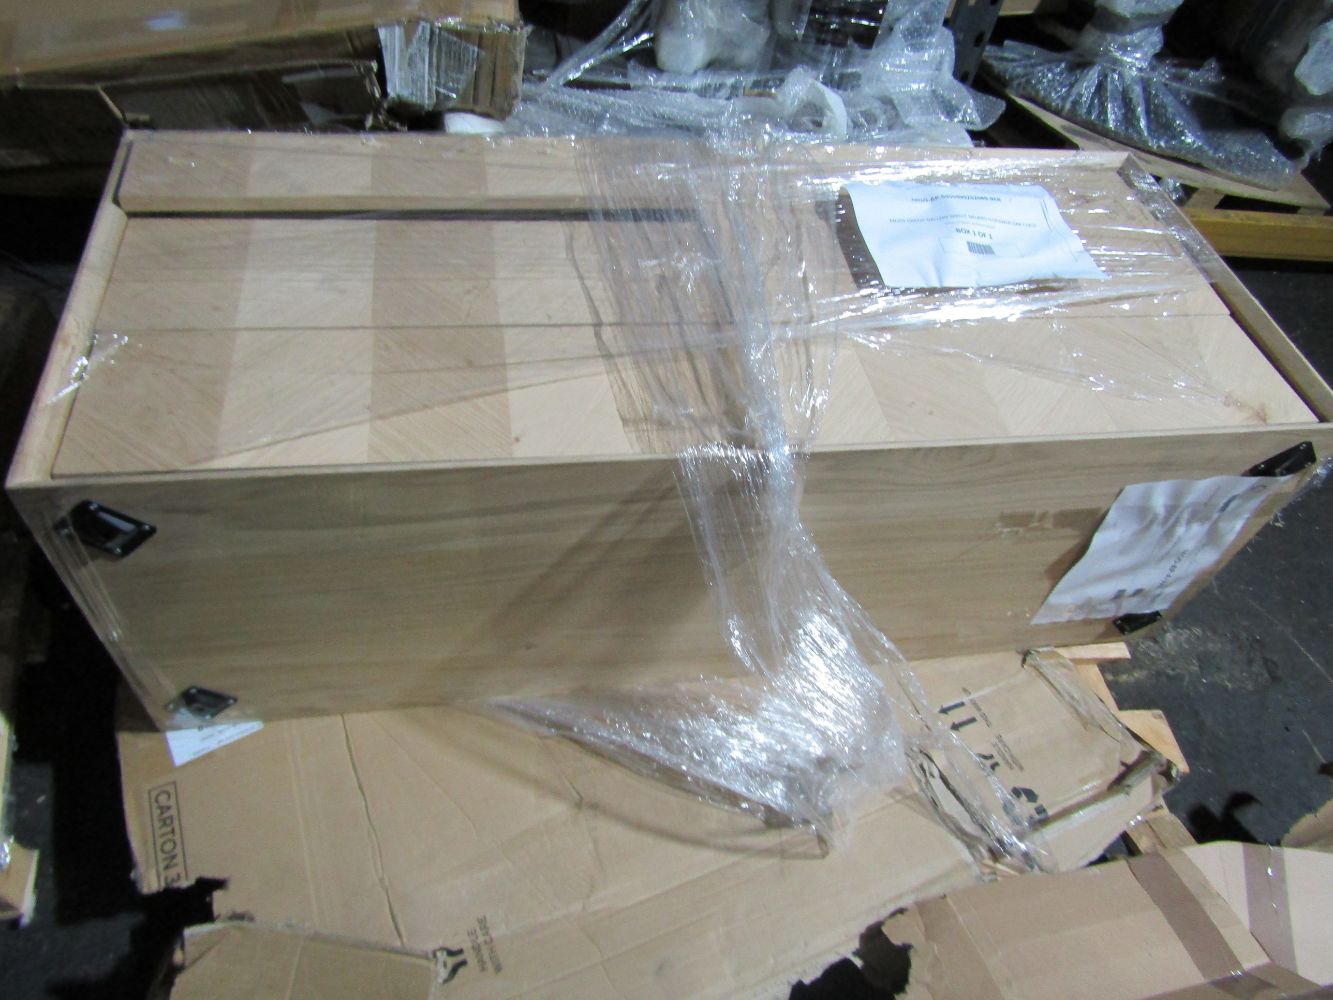 *NEW LOTS JUST ADDED* Pallets of BER Furniture from Swoon, Oak Furniture land, Cotswold and more